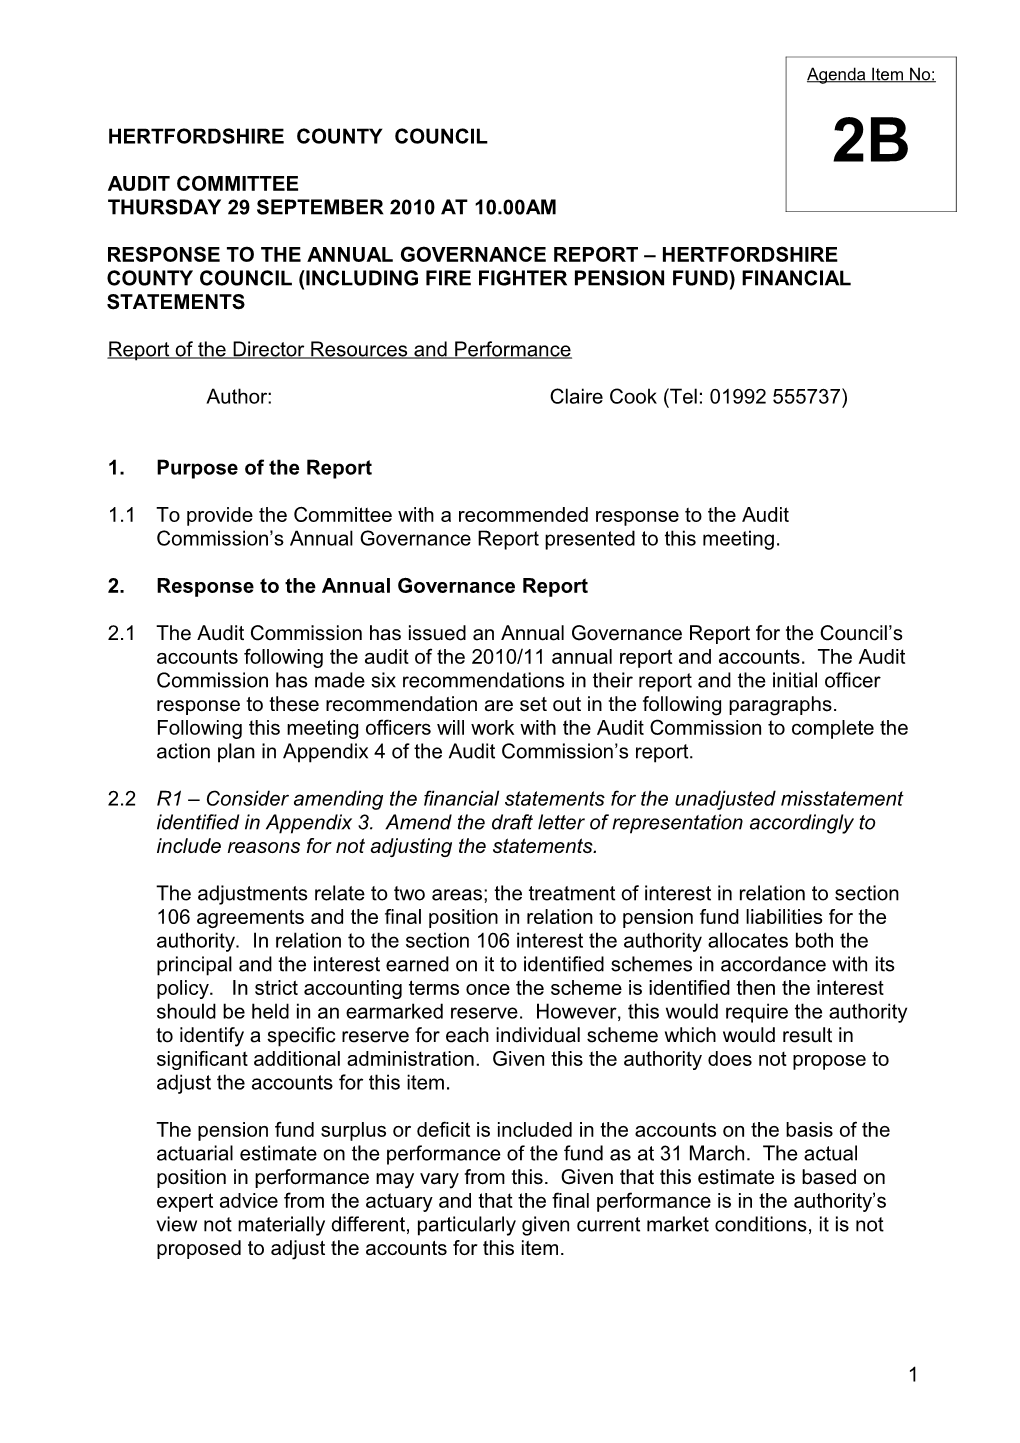 Audit Committee Thursday 29 September 2011 at 10.00Am Item 2B - Response to the AGR County